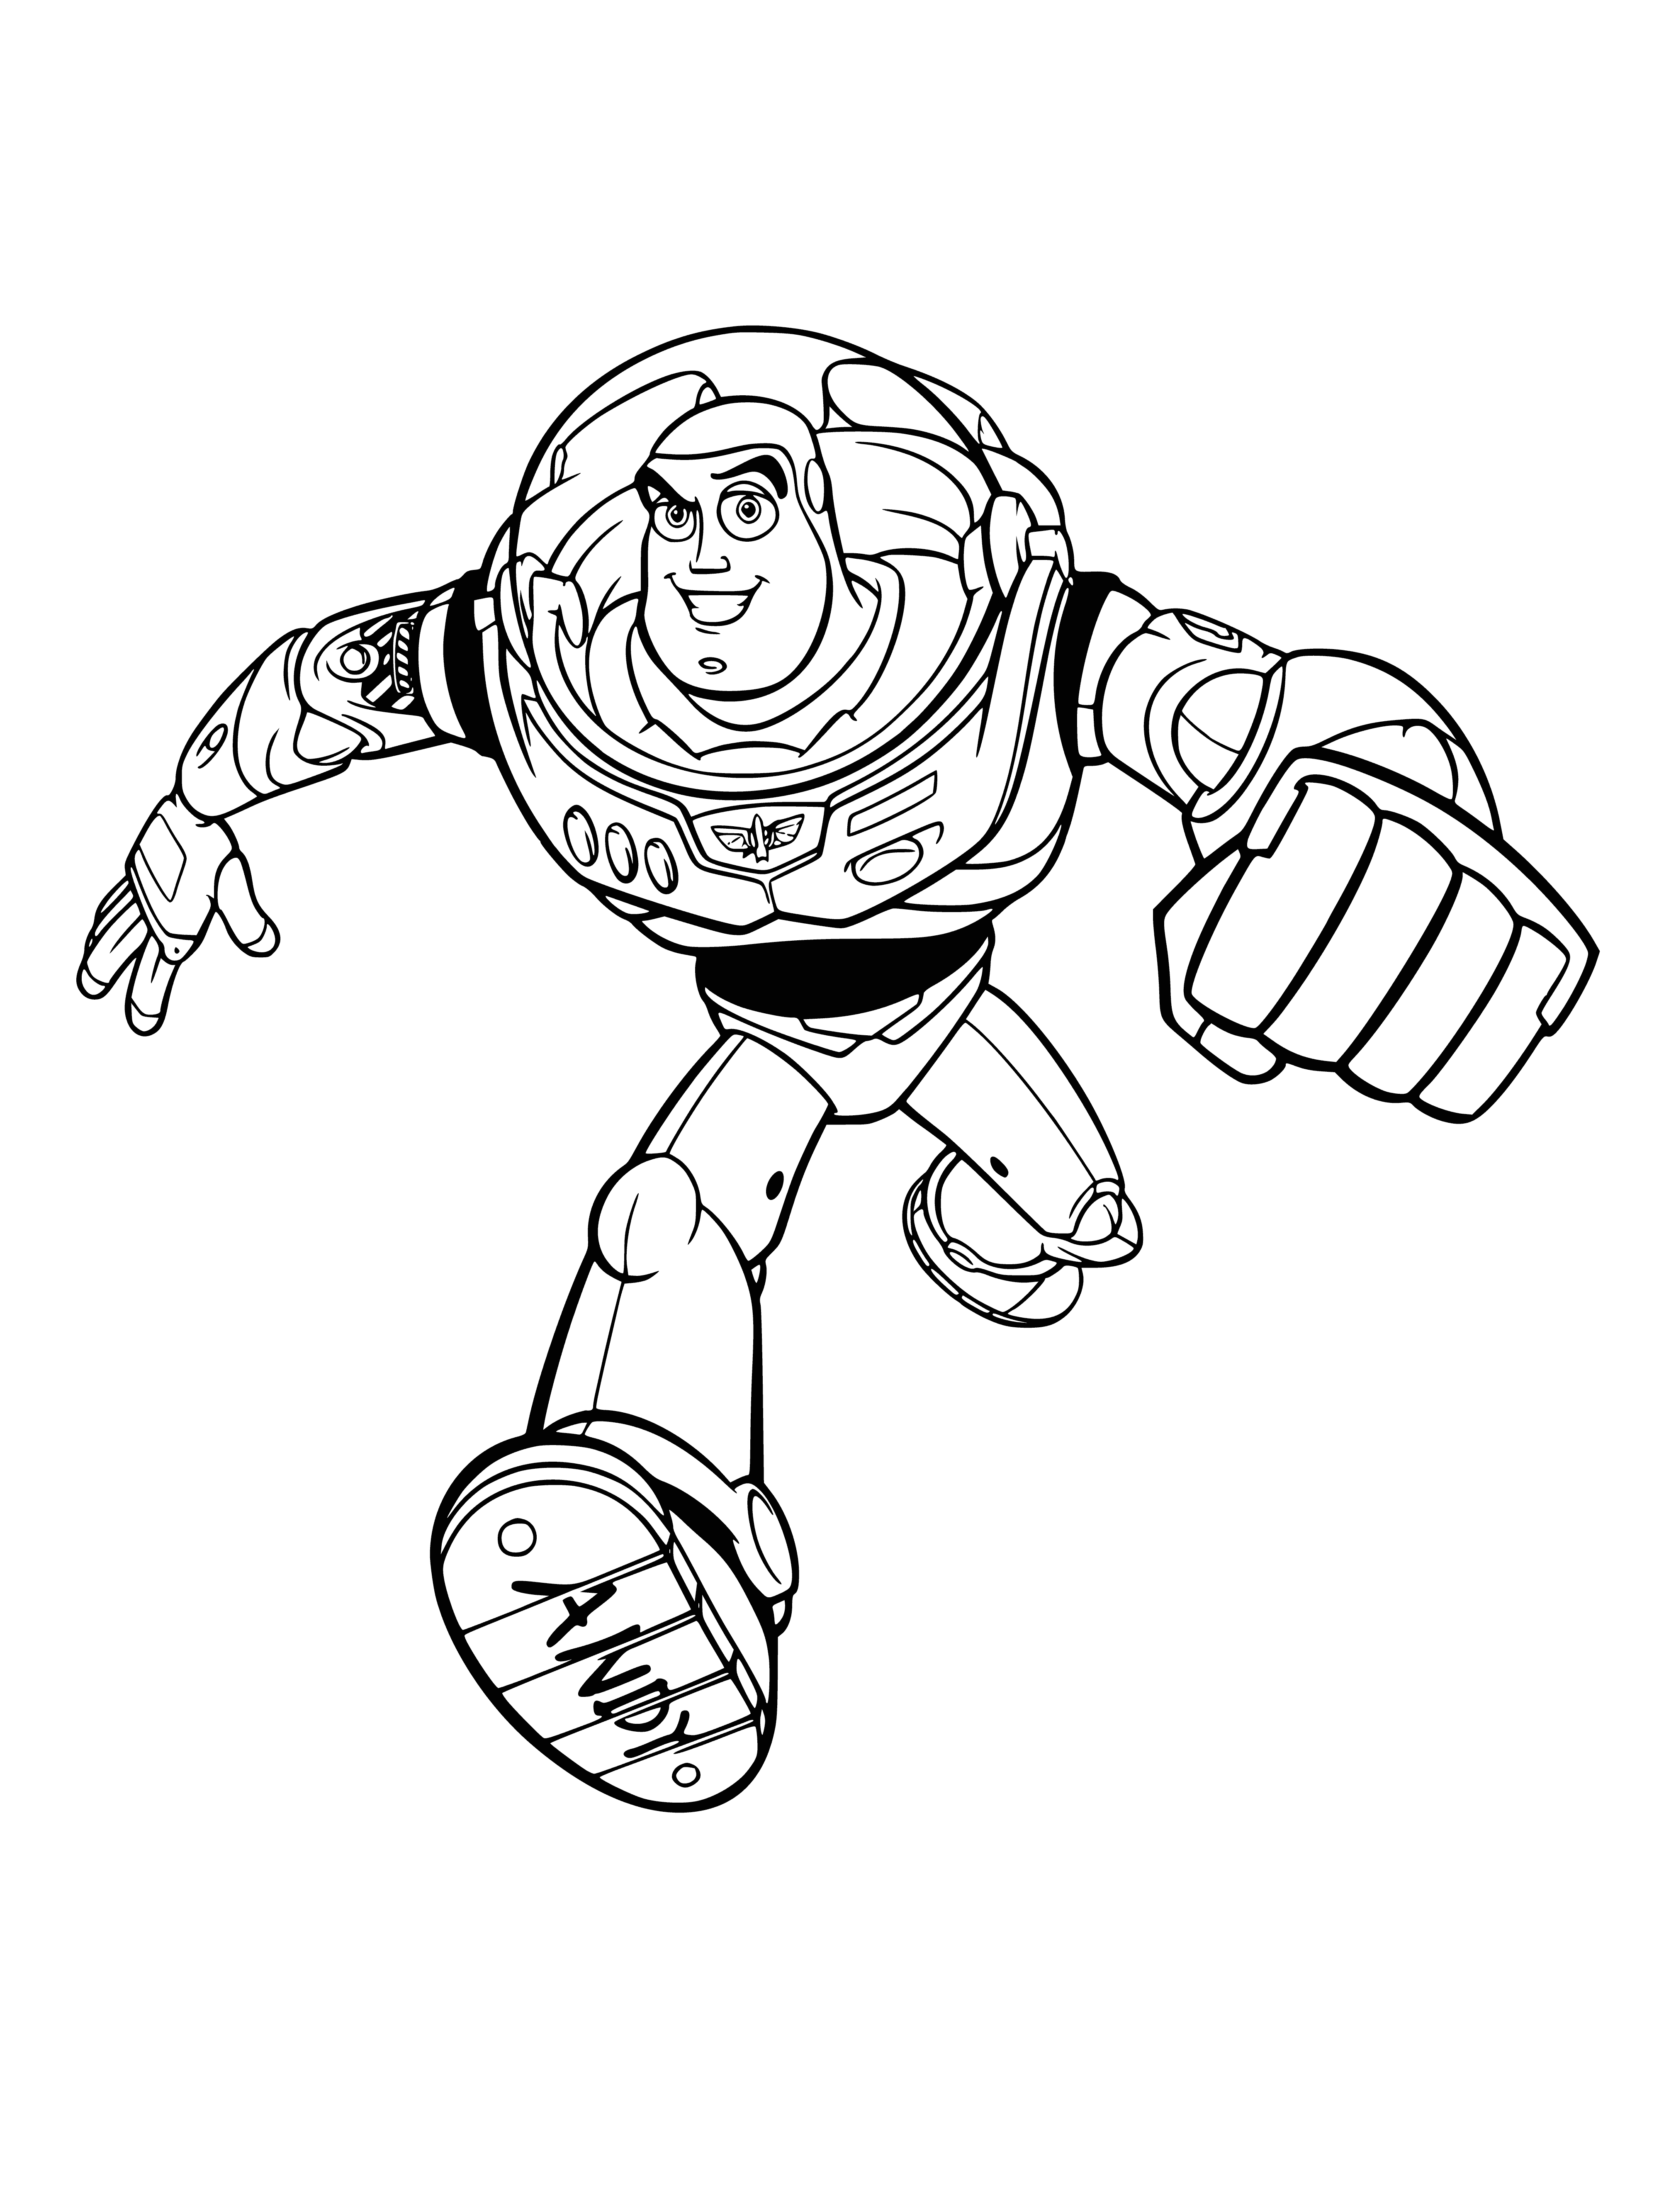 coloring page: Toy soldier stands smiling in front of spaceship, holding red laser gun, decorated with white stars.